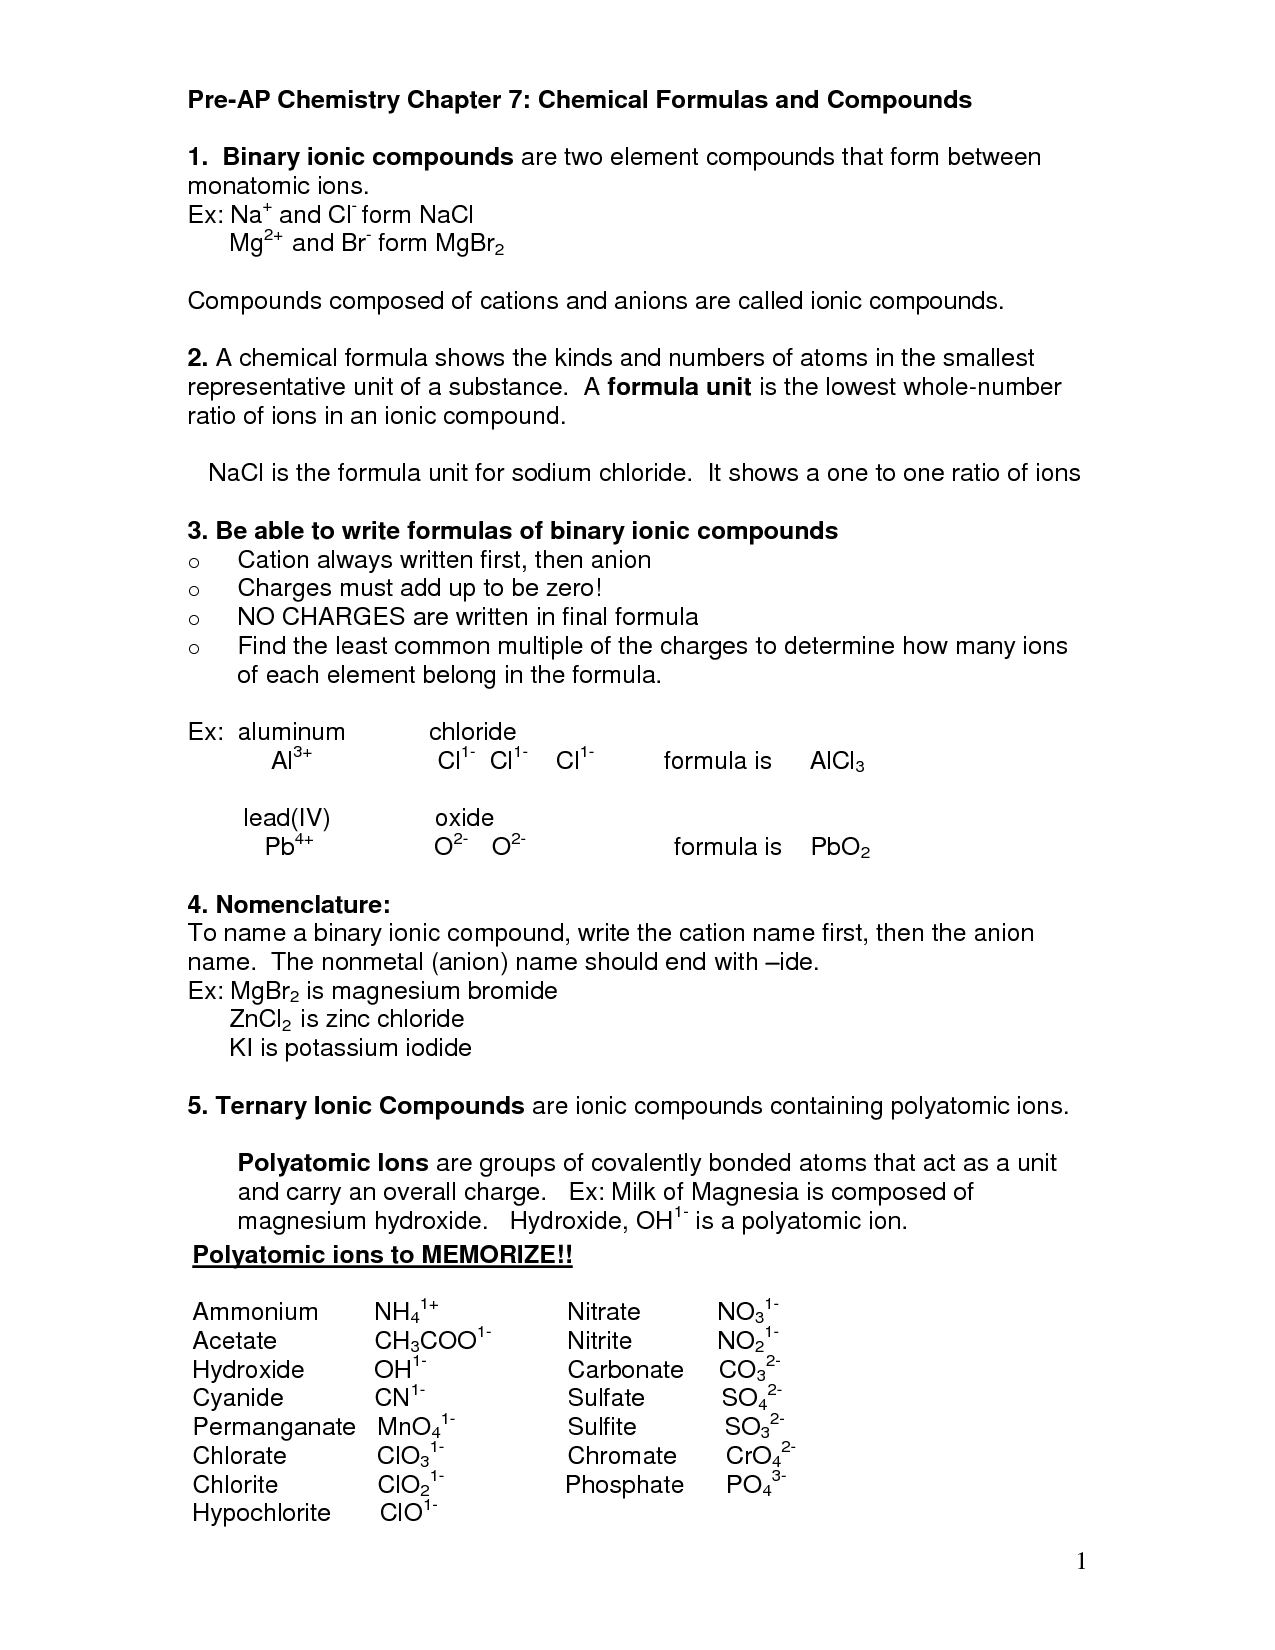 Chemistry Chapter 7 Chemical Formulas Image